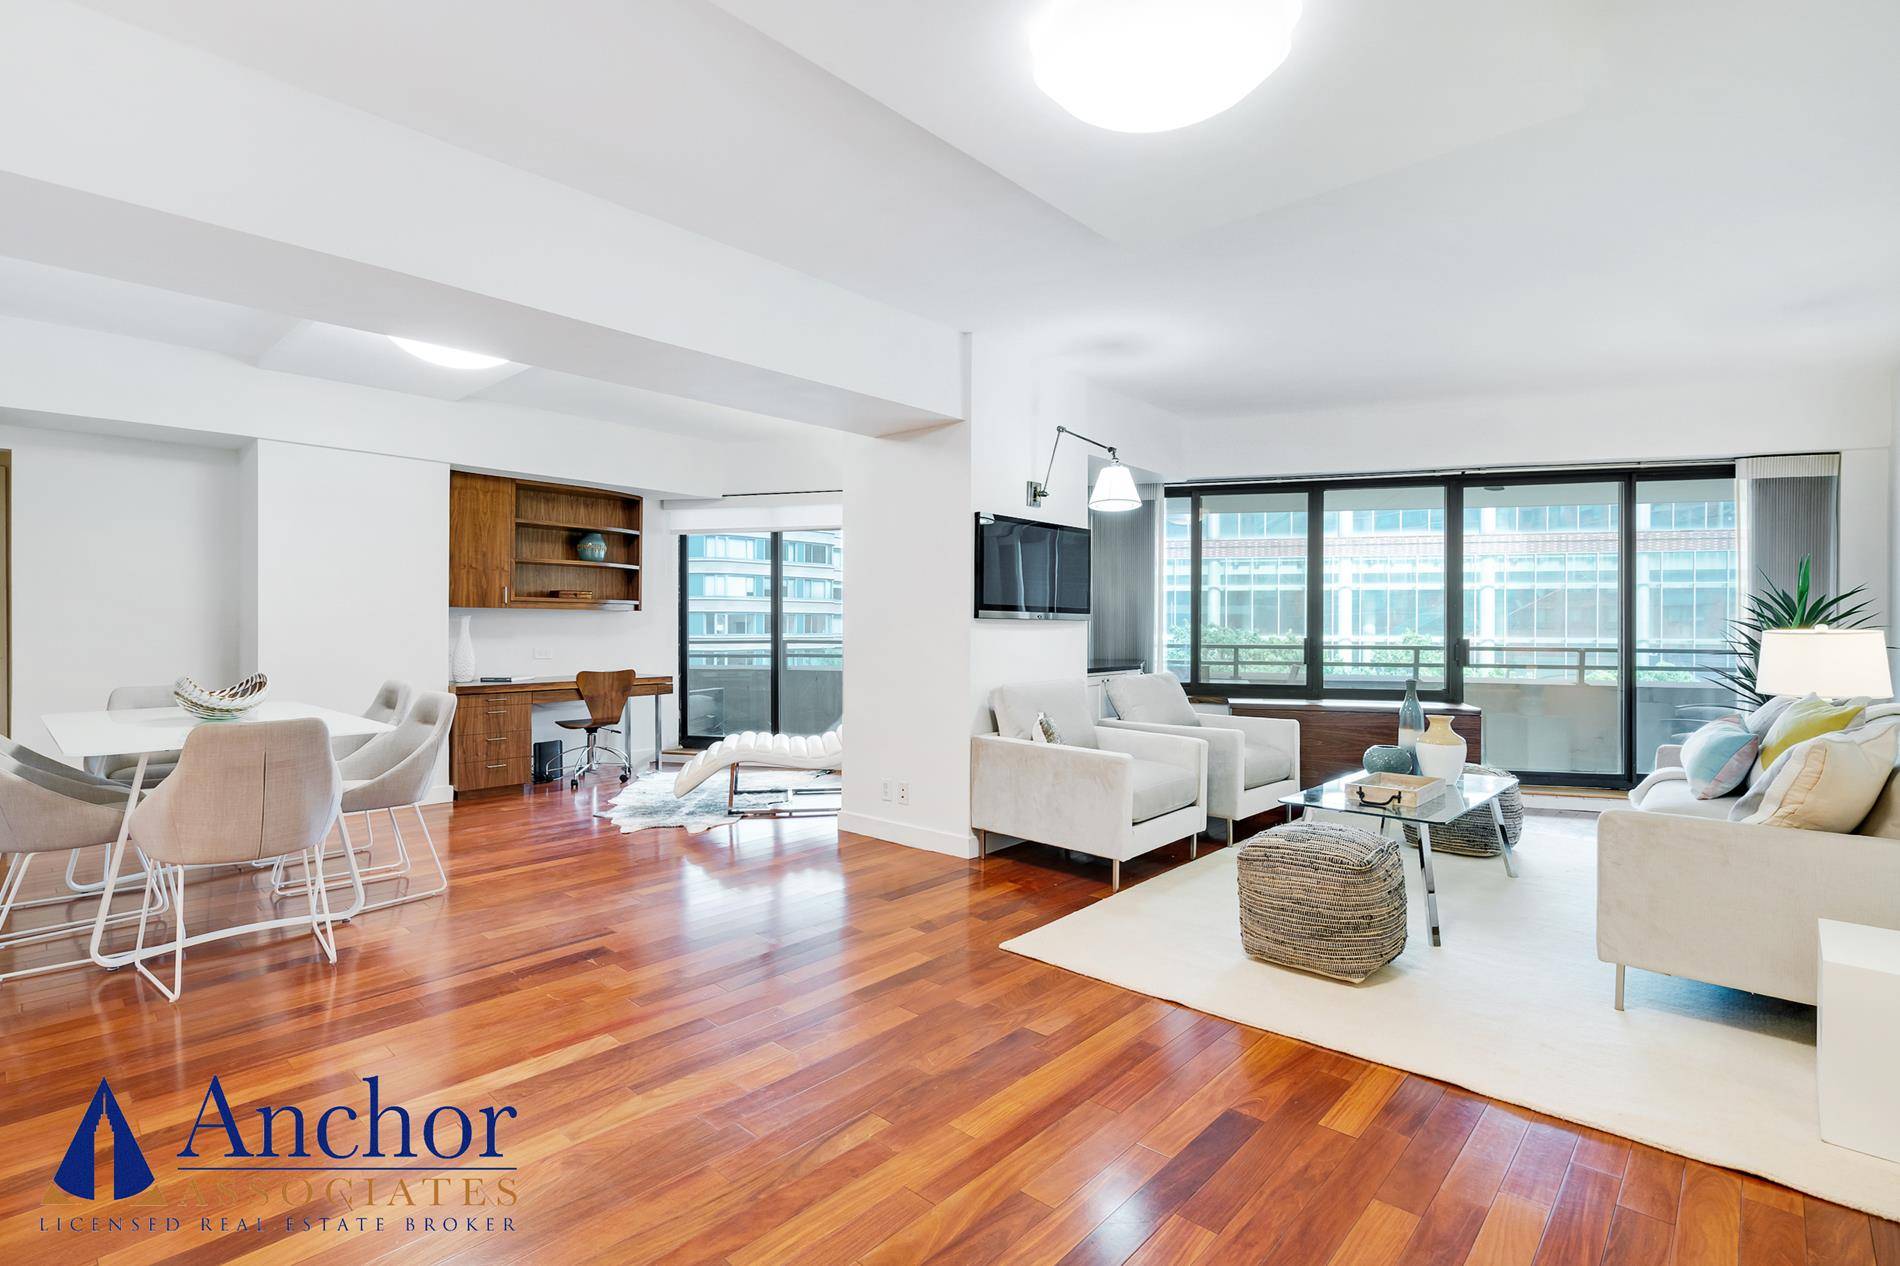 250K Price Reduction 1, 184 Sq ft 4 Bed 3 Bath Luxury DM Condo 67 68 St BroadwayRenovated Combo Apt 1900ft 500 ft Private Balcony Best Price per square foot ...